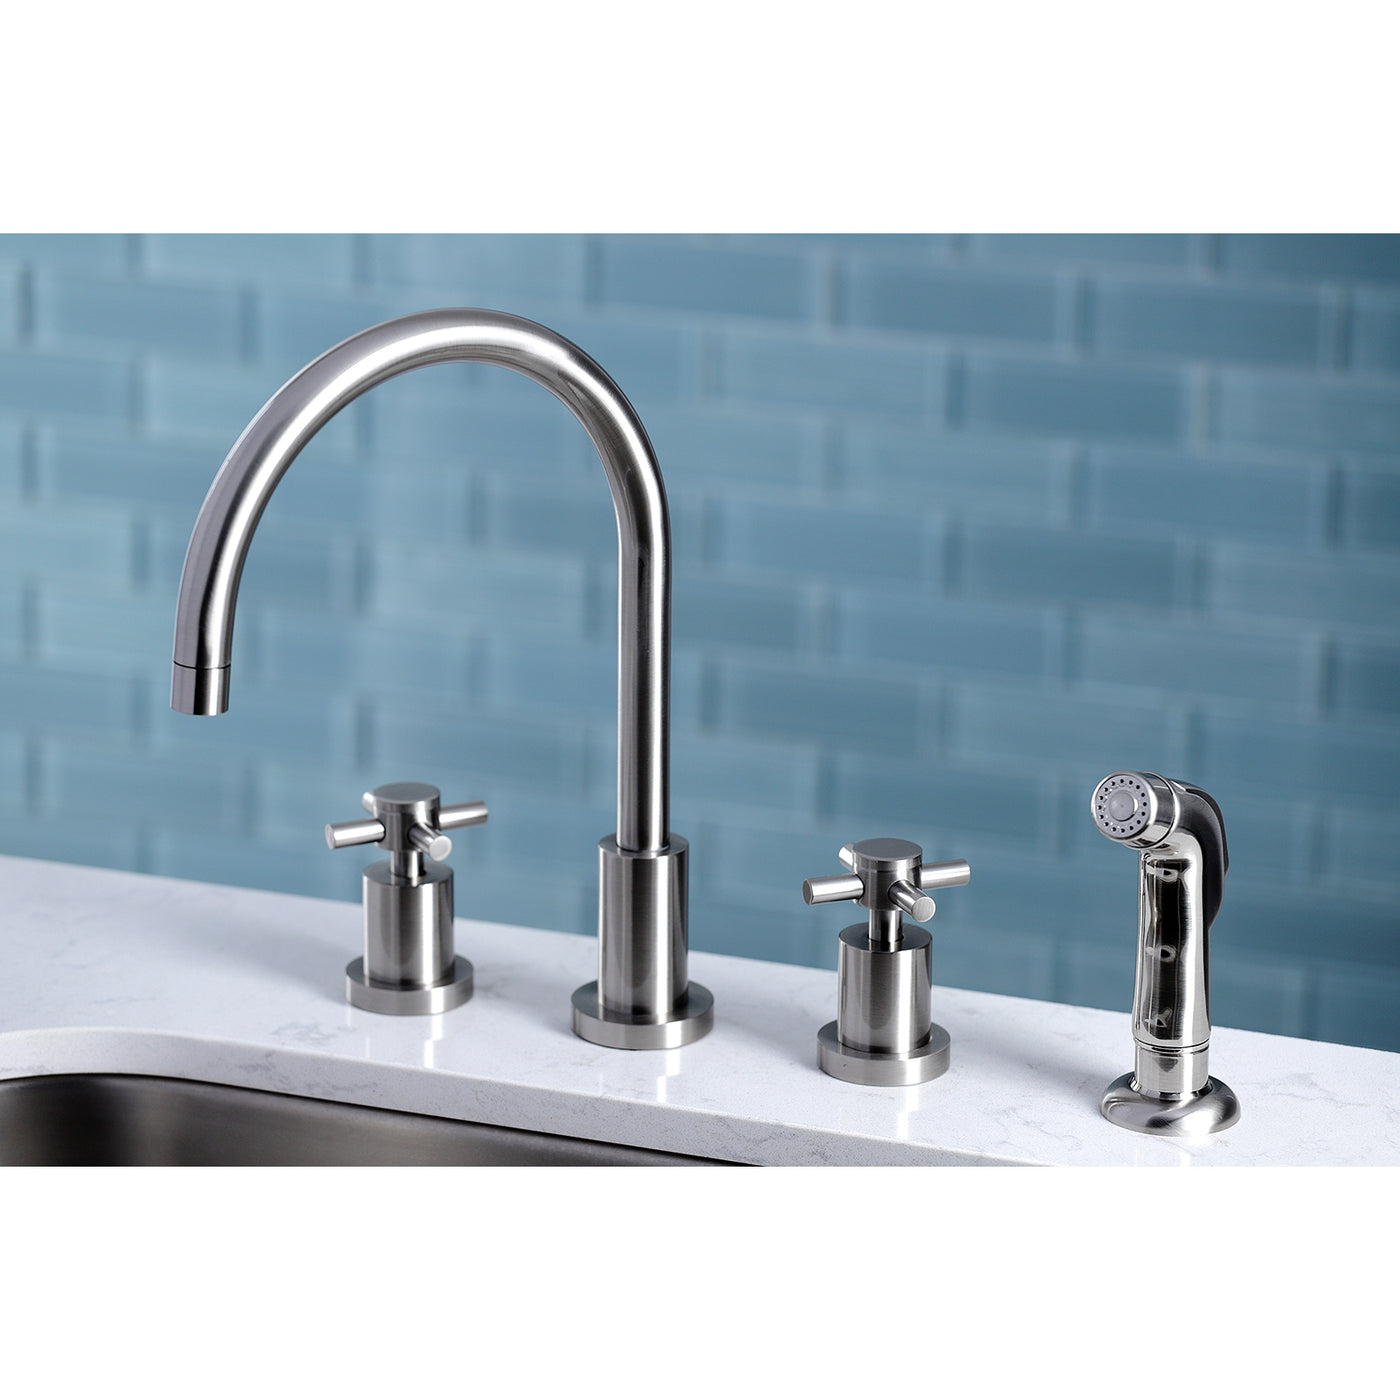 Elements of Design ES8728DX Widespread Kitchen Faucet with Plastic Sprayer, Brushed Nickel